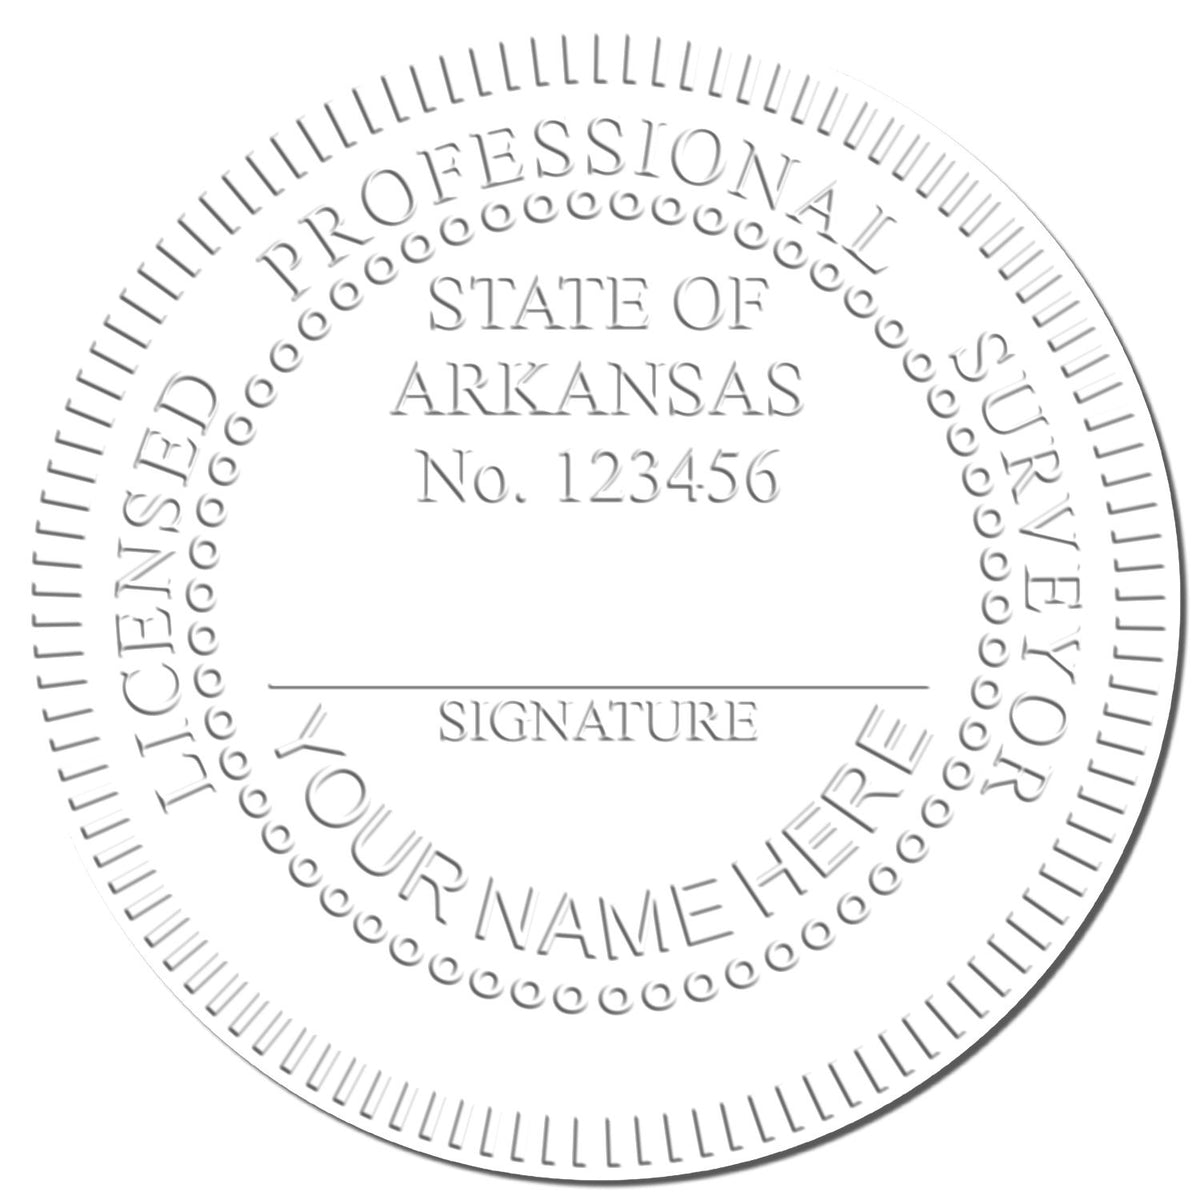 This paper is stamped with a sample imprint of the State of Arkansas Soft Land Surveyor Embossing Seal, signifying its quality and reliability.